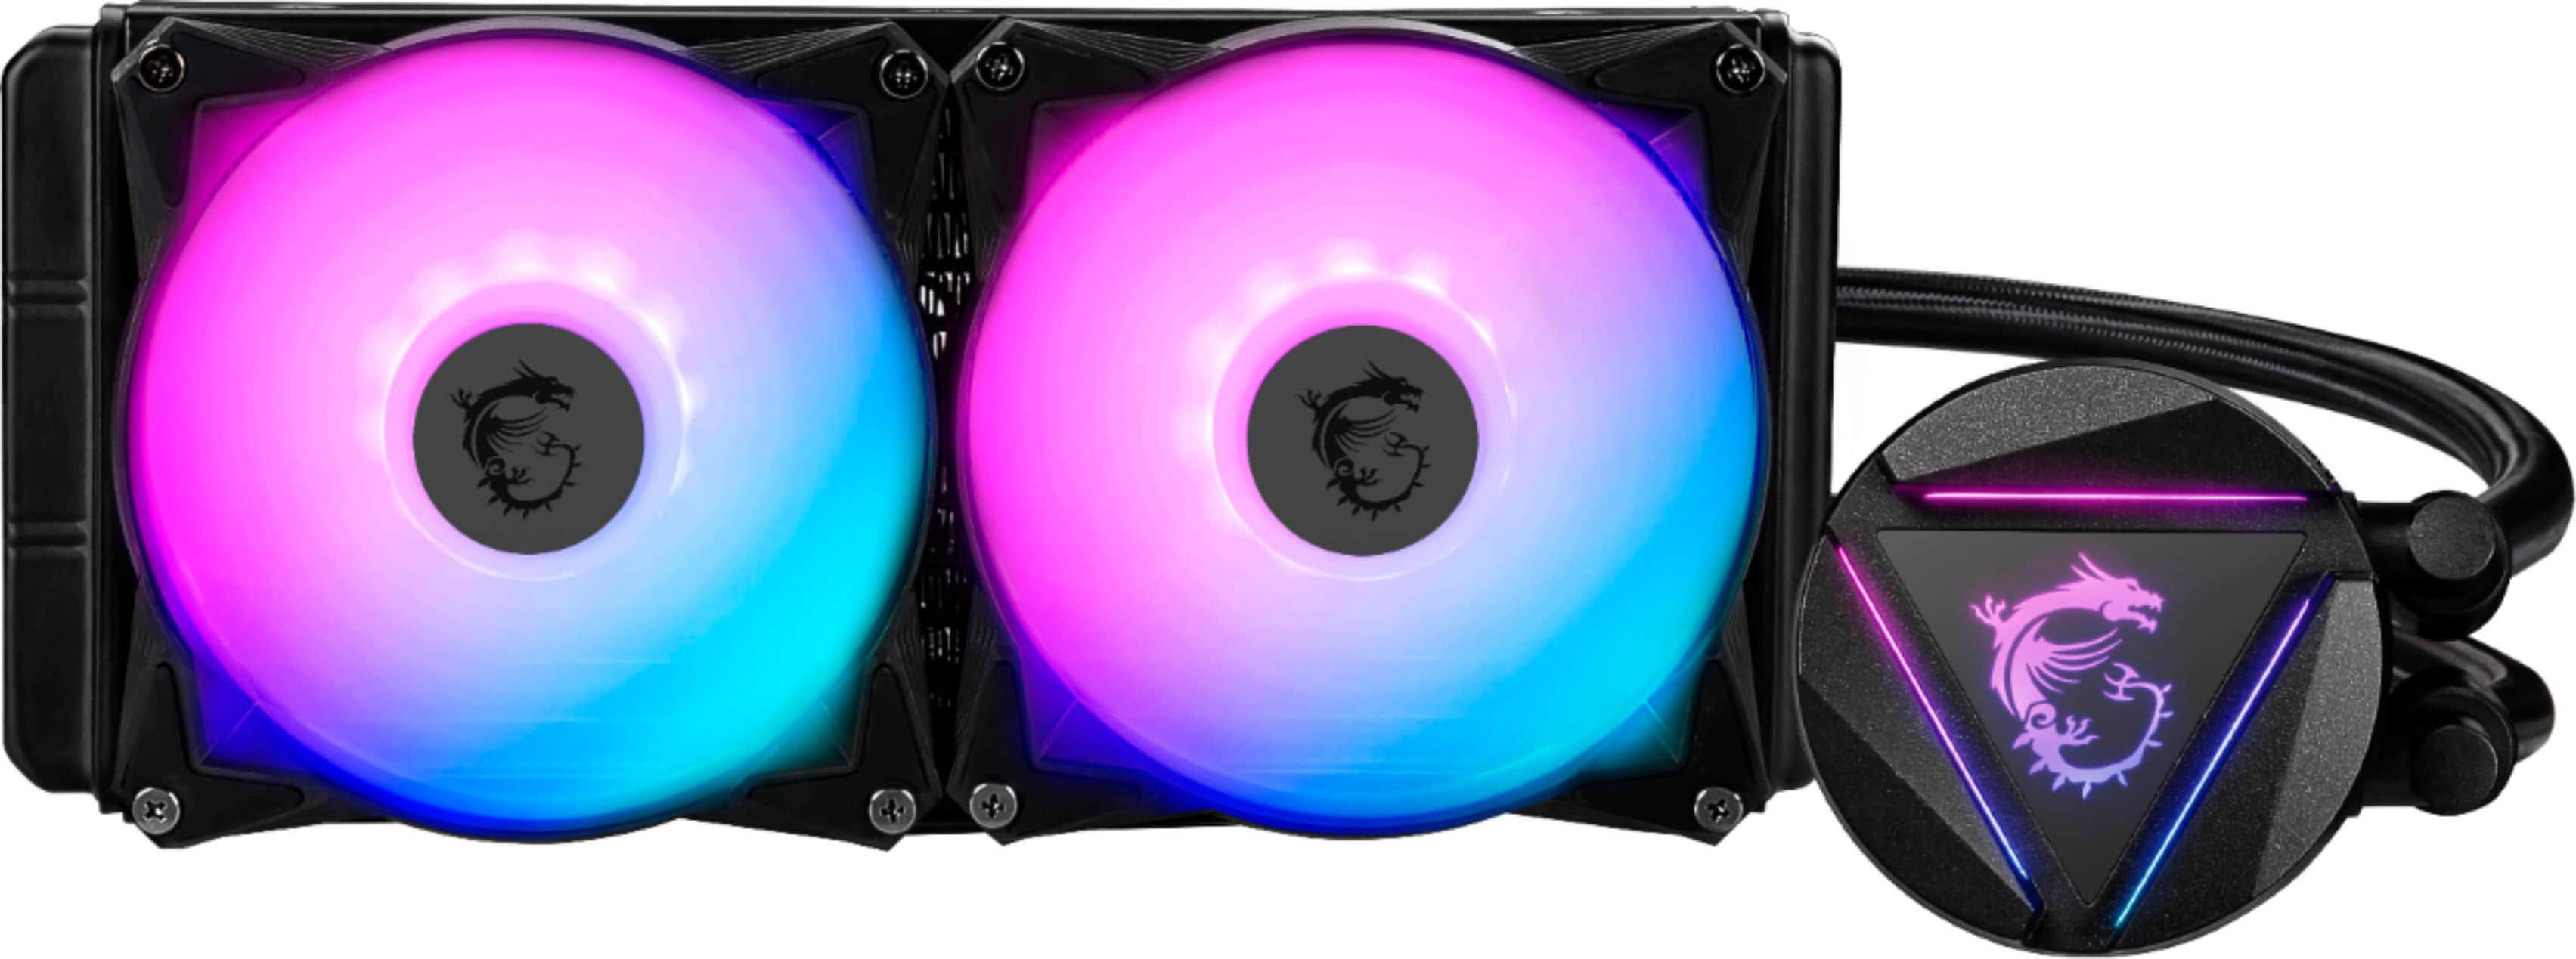 240mm Aio Cpu Cooler Kit ,pink-white Color System Water Cooling 5v